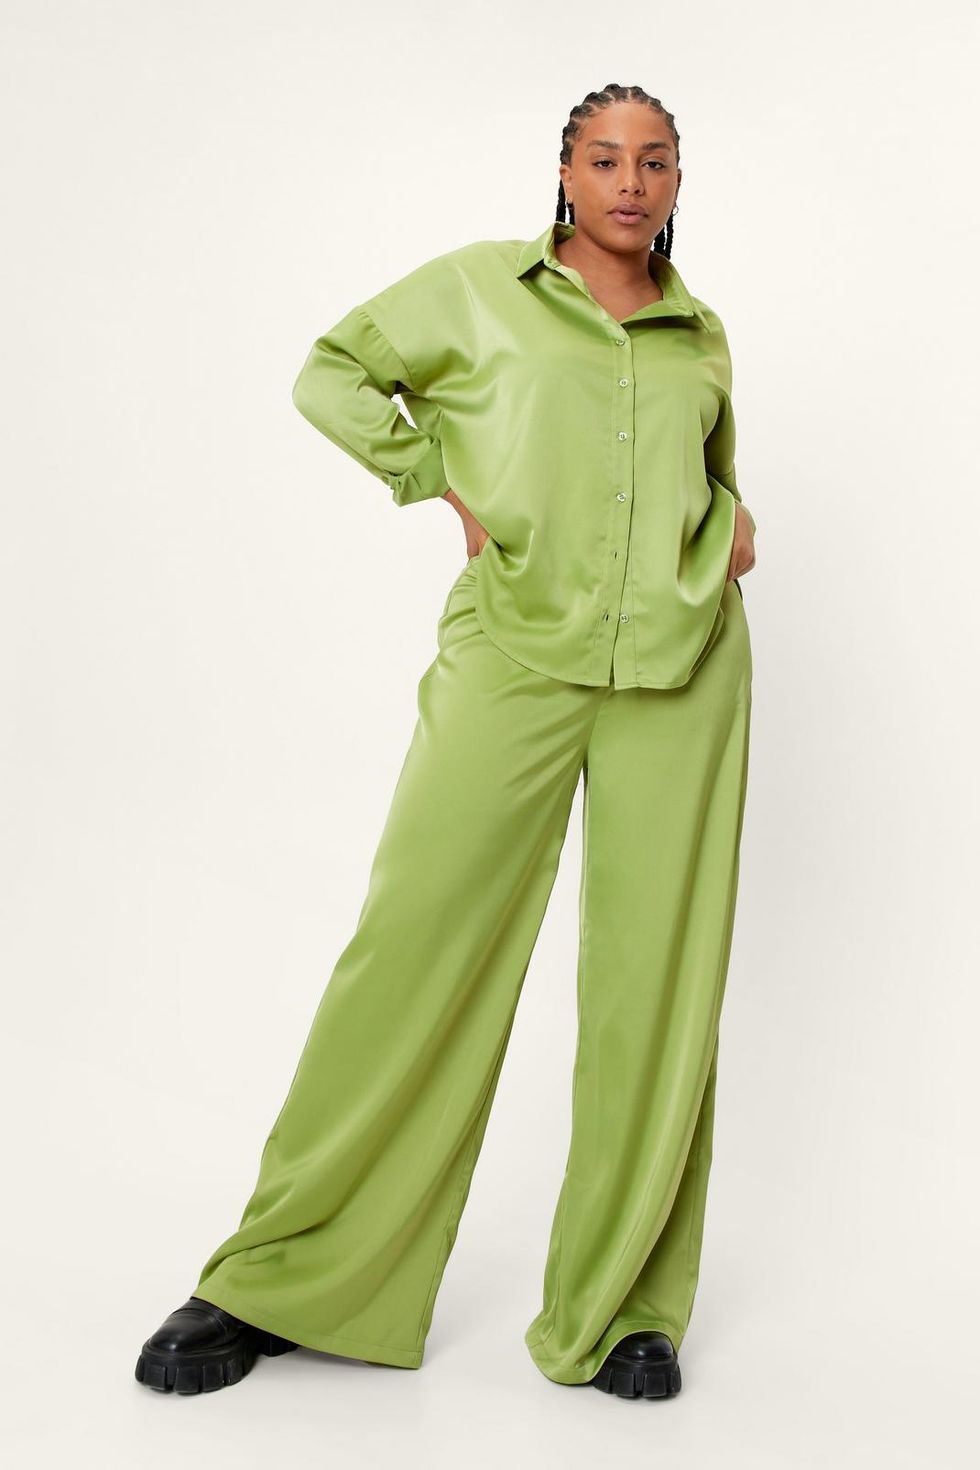 Aura Fabulous Green Pants - Office Outfits